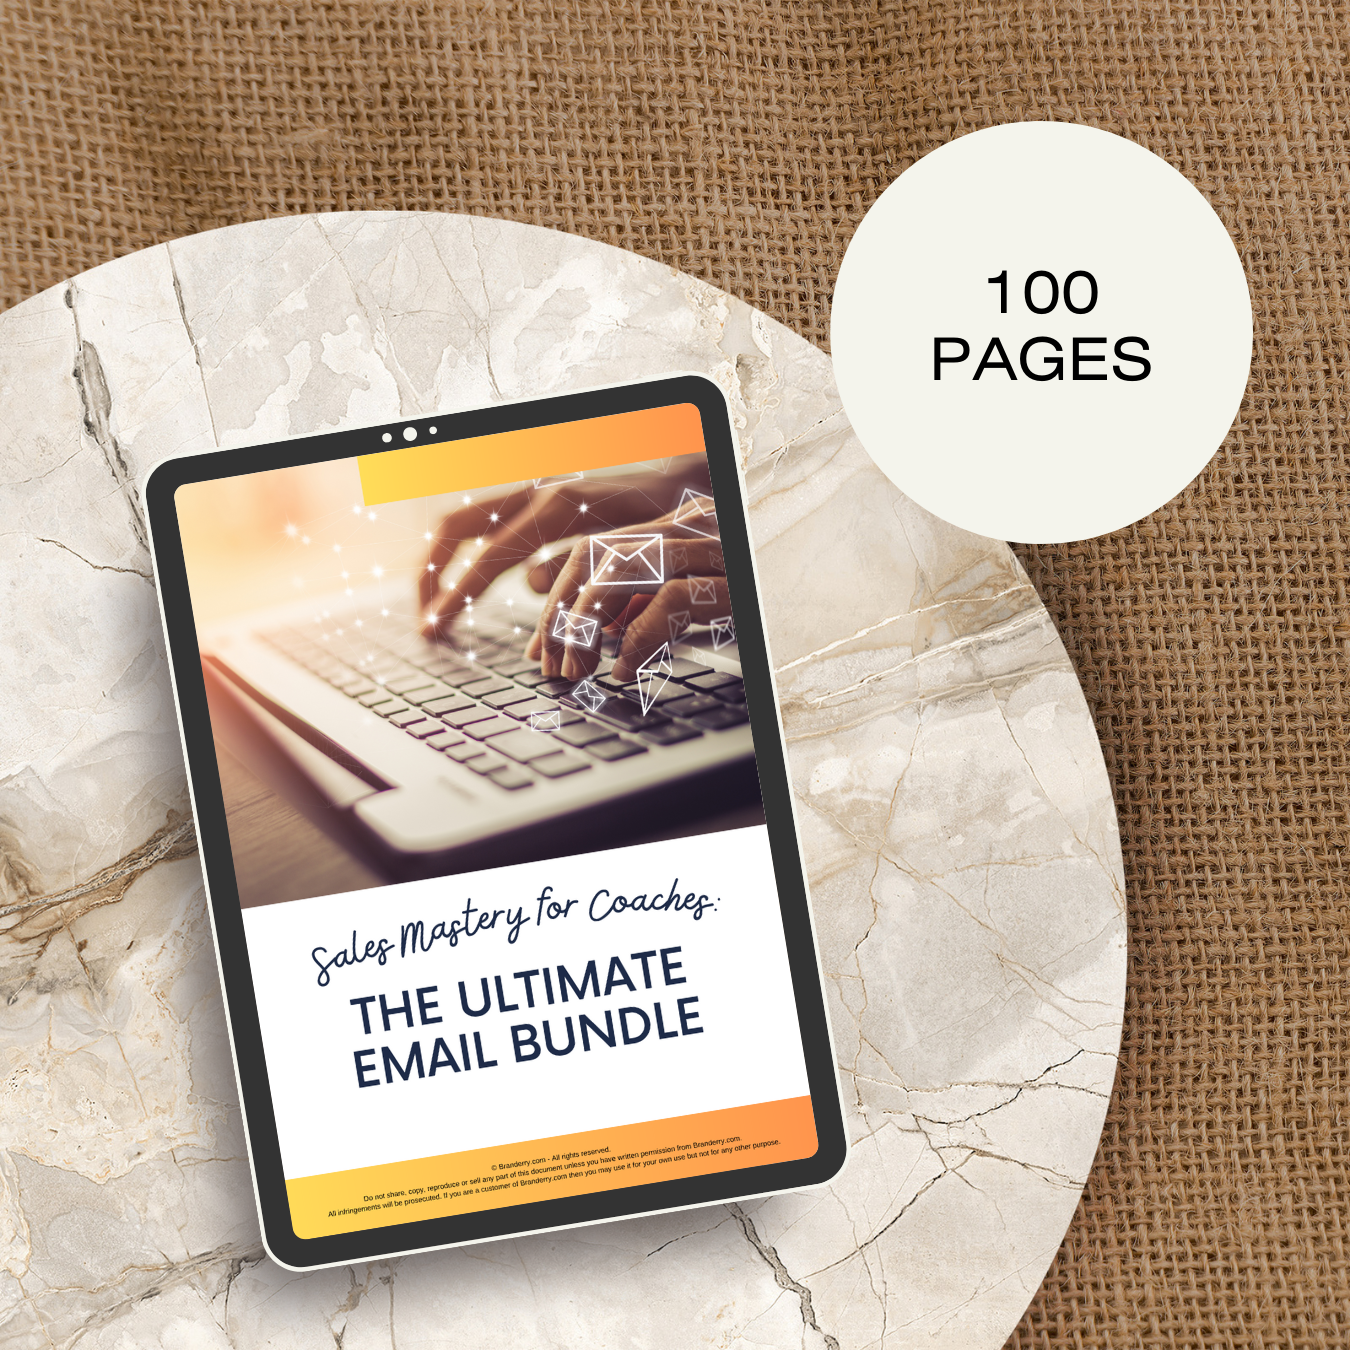 Sales Mastery for Coaches: The Ultimate Email Bundle